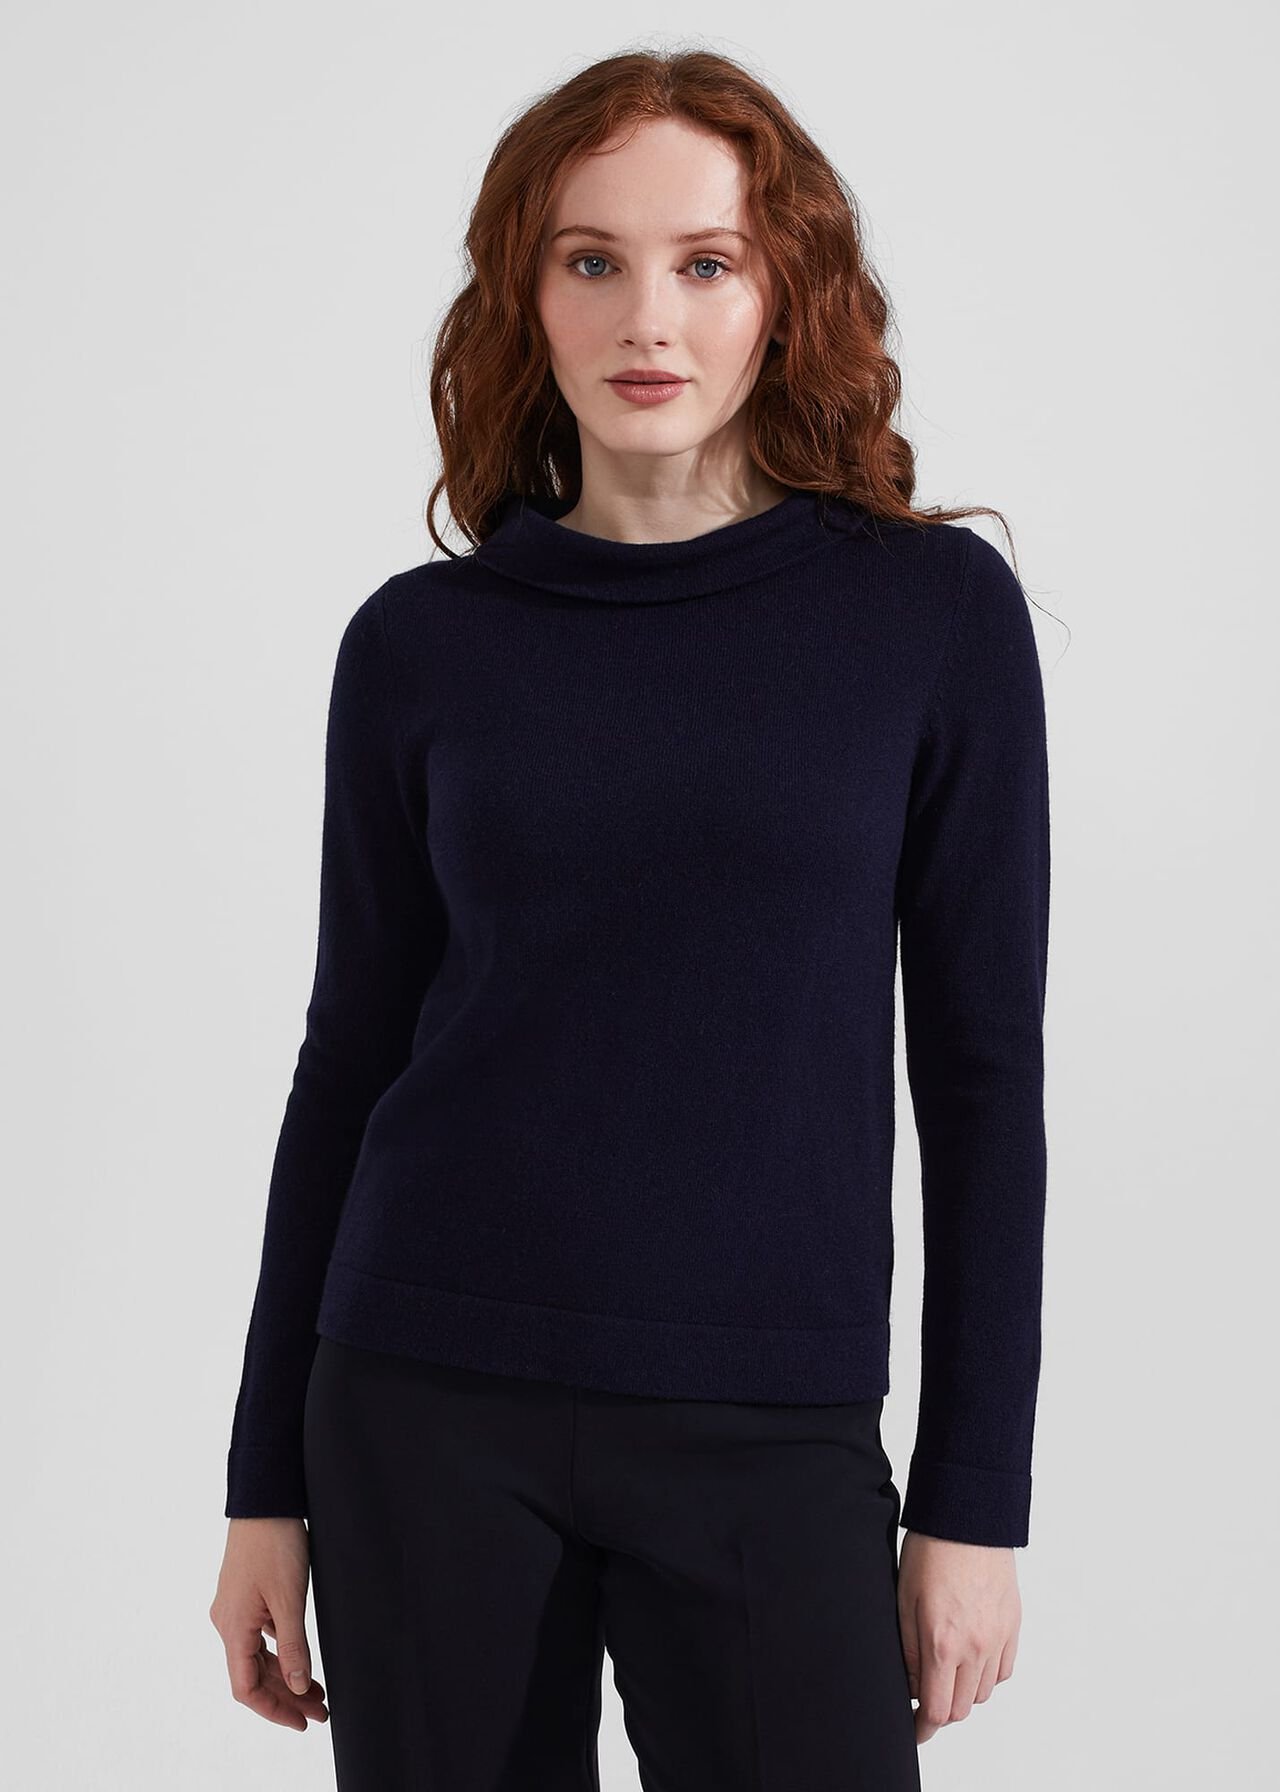 Audrey Wool Cashmere Sweater, Navy, hi-res